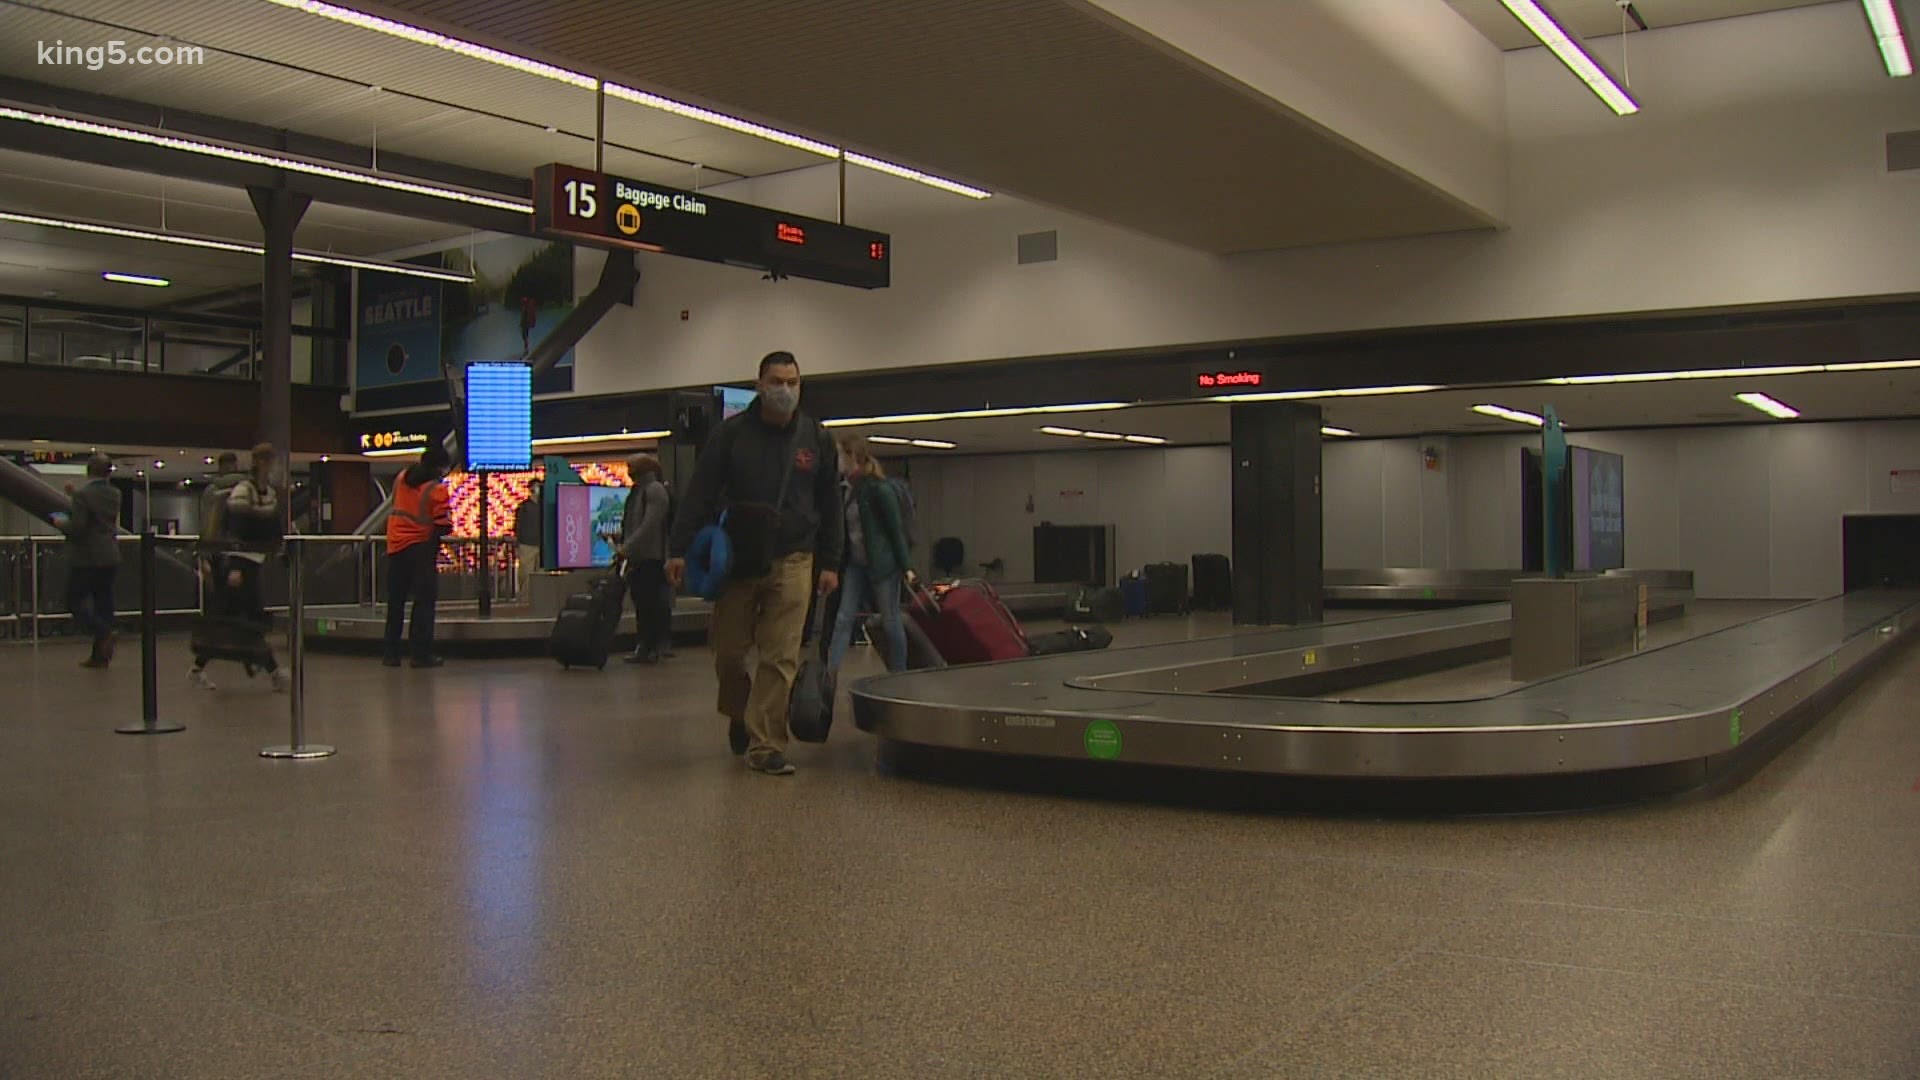 Far fewer passengers are traveling through Sea-Tac Airport this holiday as travel warnings stretch from Washington state around the country.